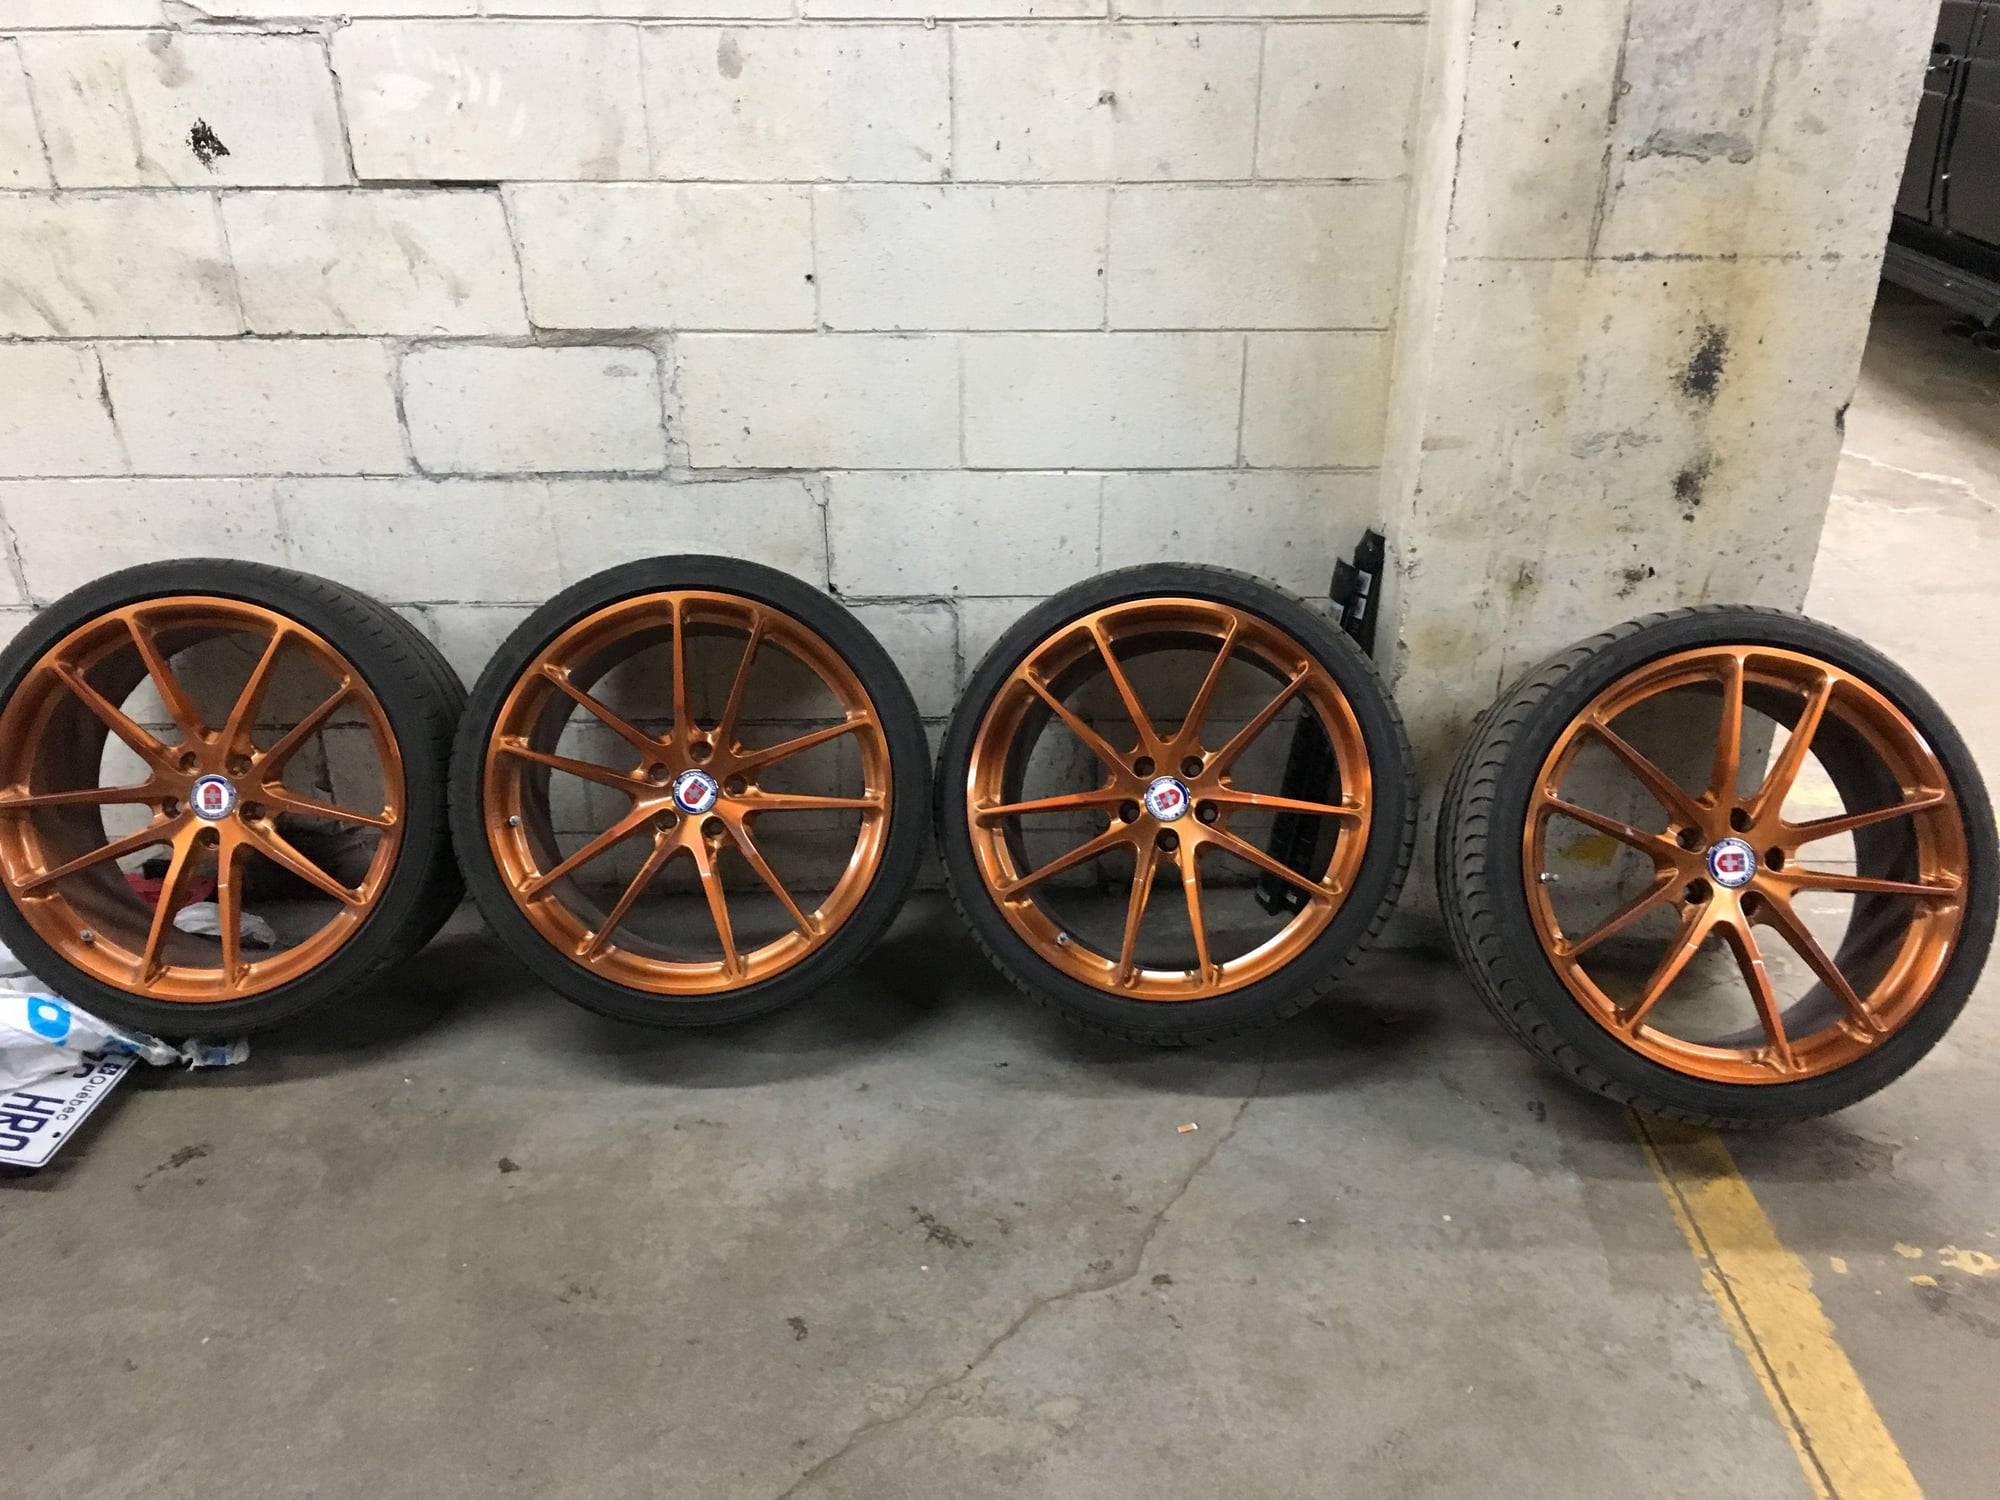 Wheels and Tires/Axles - 20" inch HRE P104 bronze w/ Toyo Proxes T1 305/25r20 265/30r20 5x112 Mercedes - Used - Champlain, NY 12919, United States